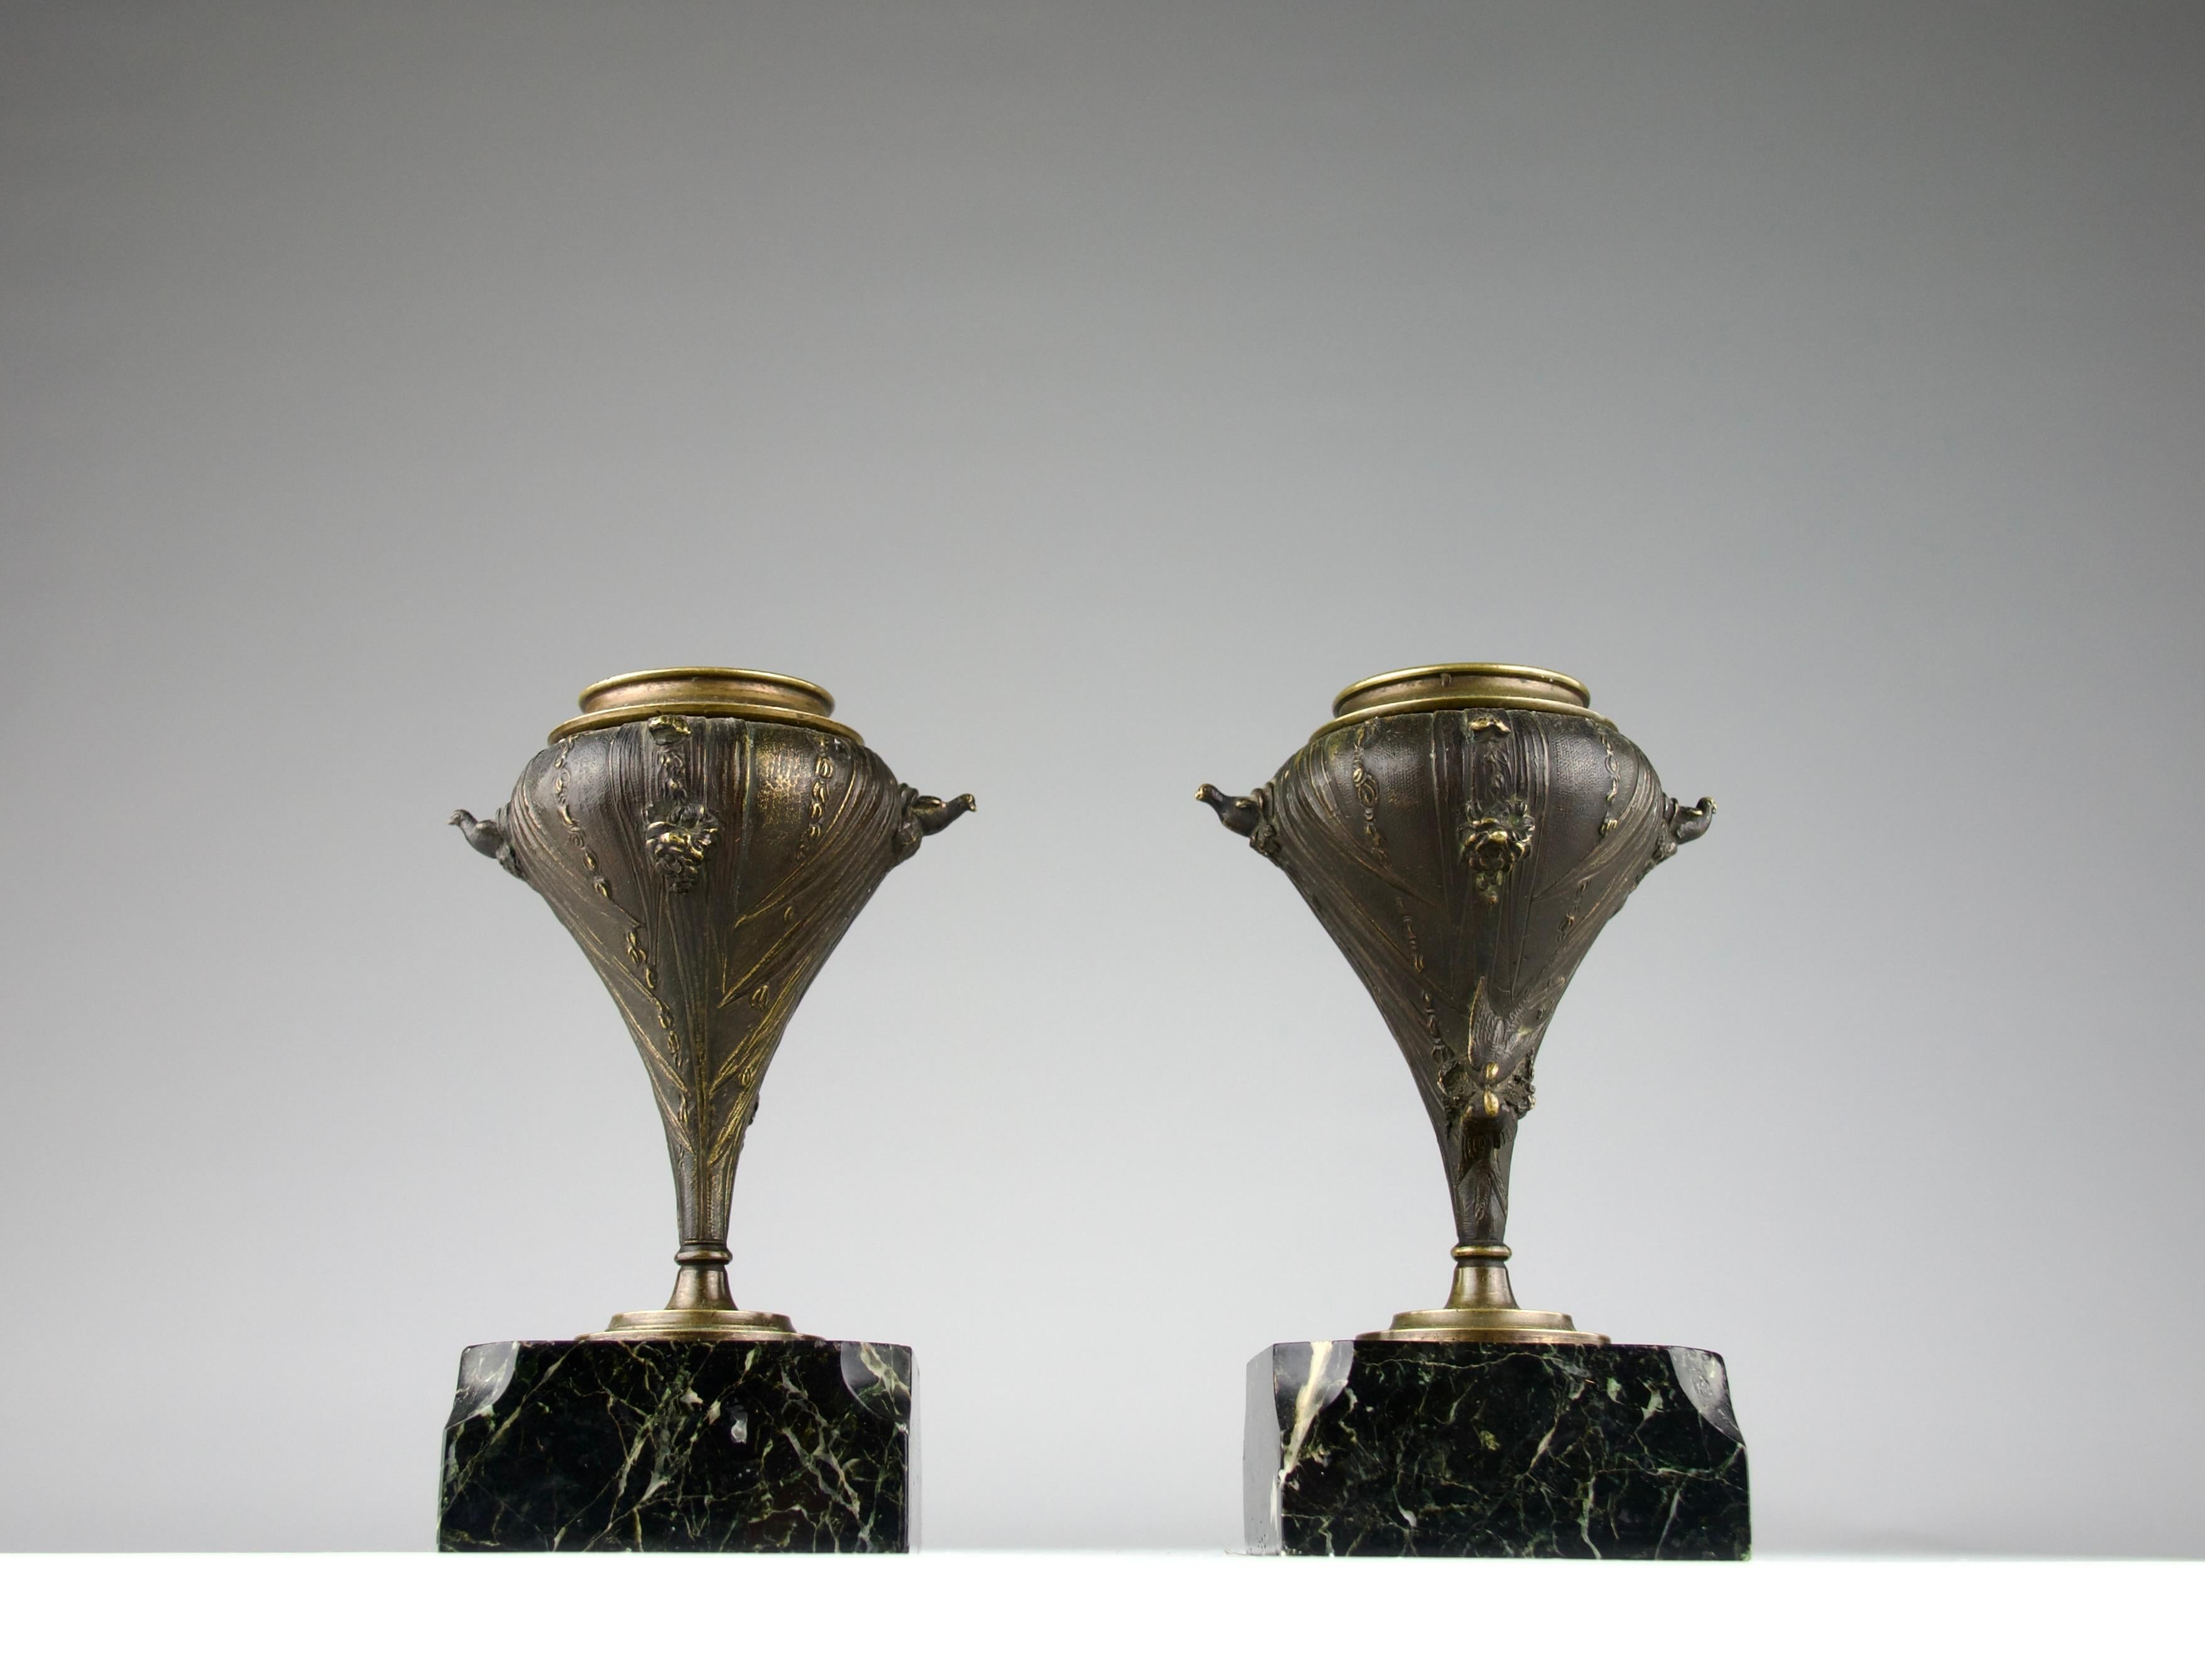 Superb art deco candleholders by LeBlanc Barbedienne. Beautiful and intricate decorations of pigeons and swallows. In bronze and Portor black and white veined marble. France, Late 1800s. Signed LeBlanc.

In good condition, oxidation, small chips